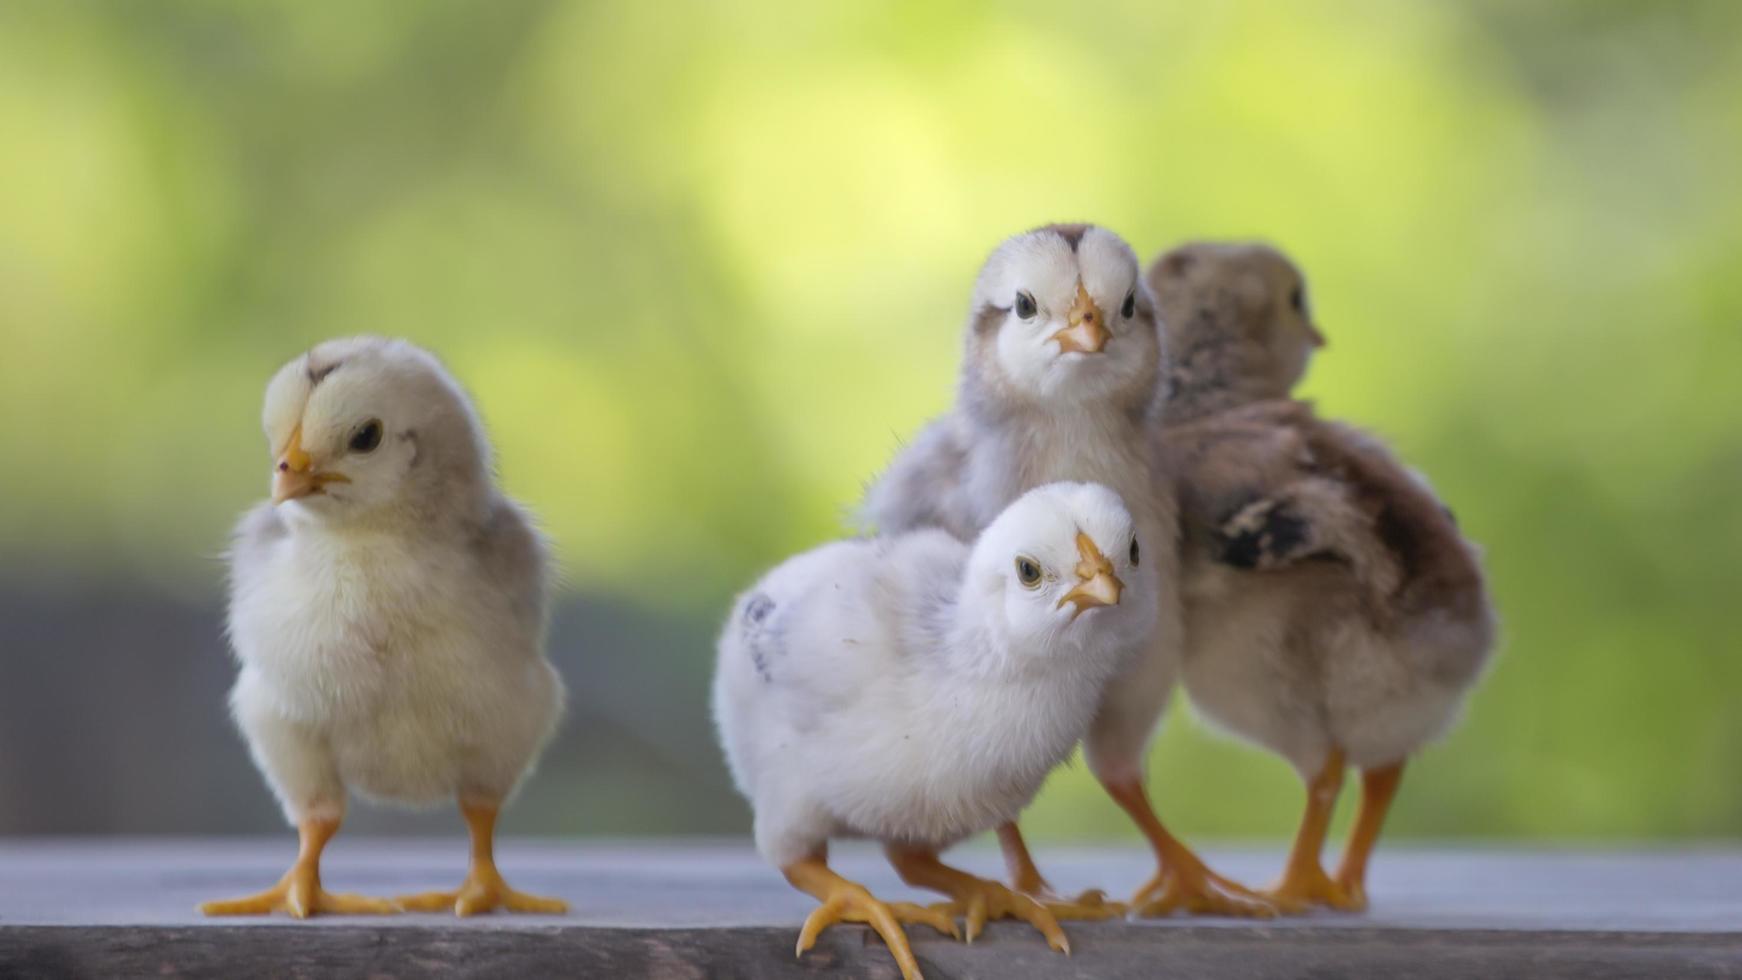 4 yellow baby chicks on wood floor behind natural blurred background photo